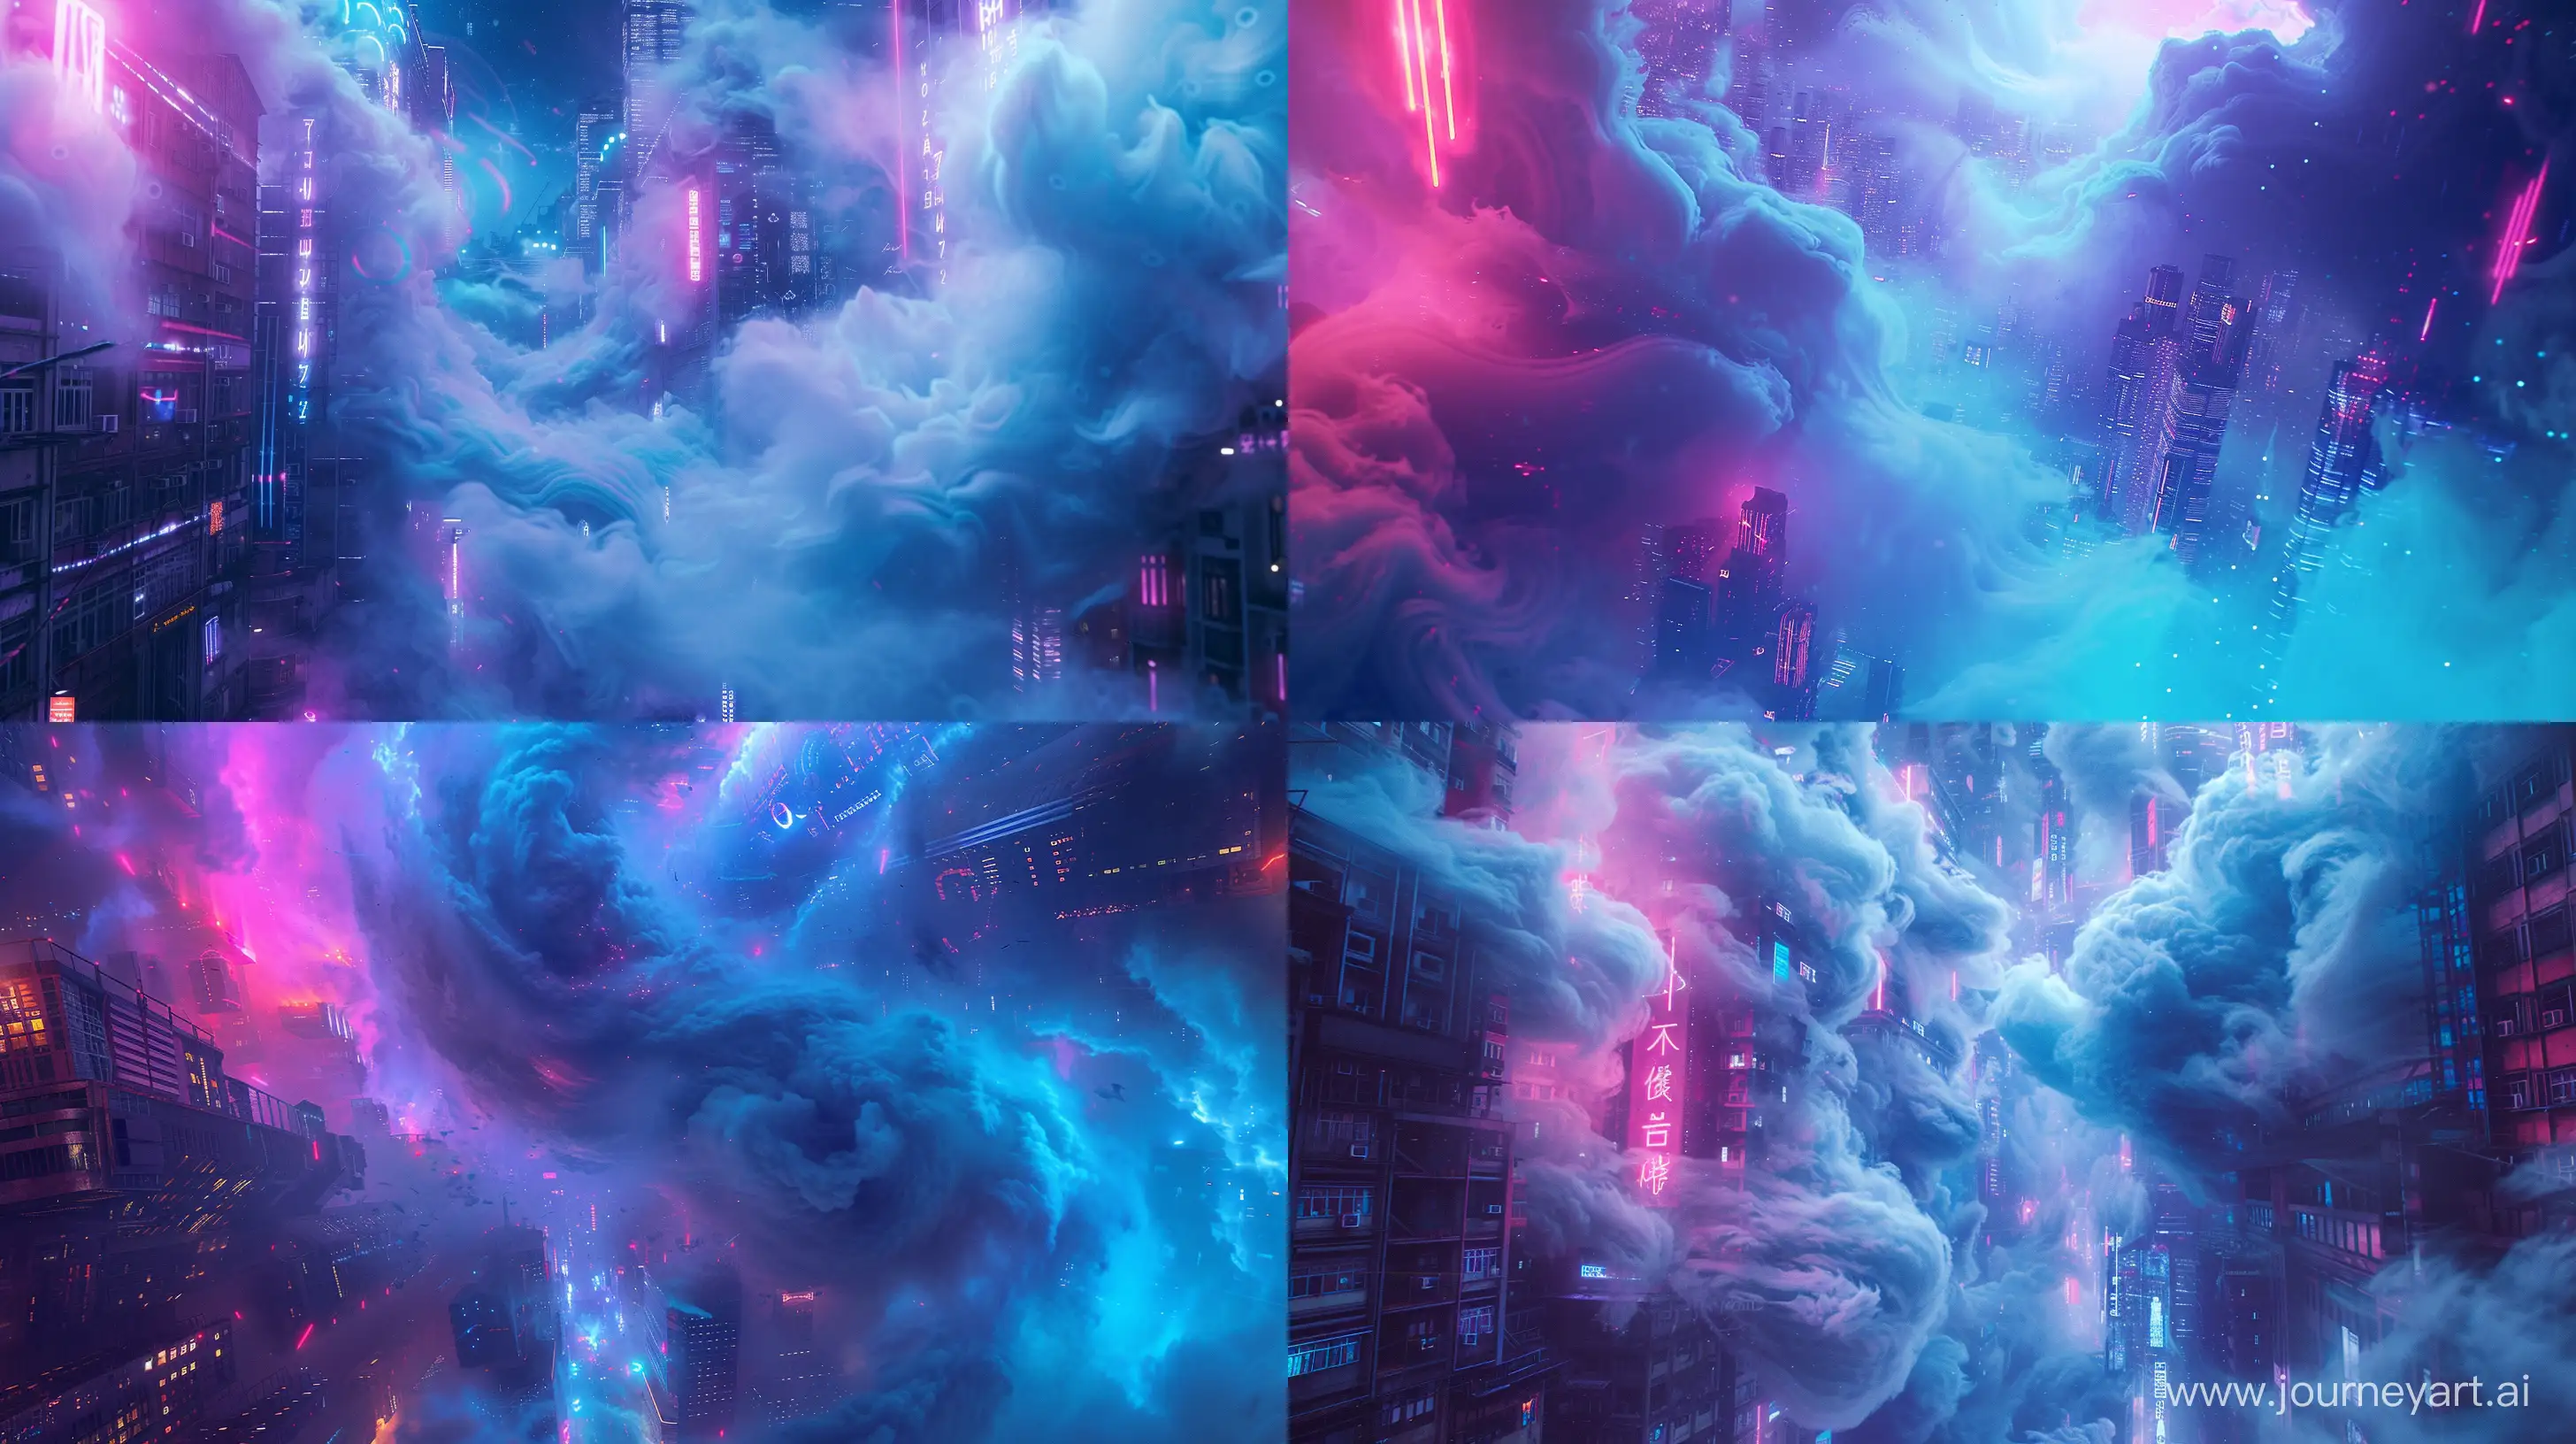 Create an album cover showcasing a surreal, abstract depiction of a futuristic metropolis engulfed in swirling clouds of smog and neon lights. Drawing inspiration from the album's electronic soundscapes, incorporate glitch art elements and digital distortion effects. Utilize a vibrant color palette dominated by electric blues, deep purples, and pulsating pinks. Shot using a Fujifilm X-T4 with a 16mm f/1.4 lens, capturing the chaotic energy and cybernetic aesthetic of the imaginary cityscape. --v 6.0 --style raw --ar 16:9